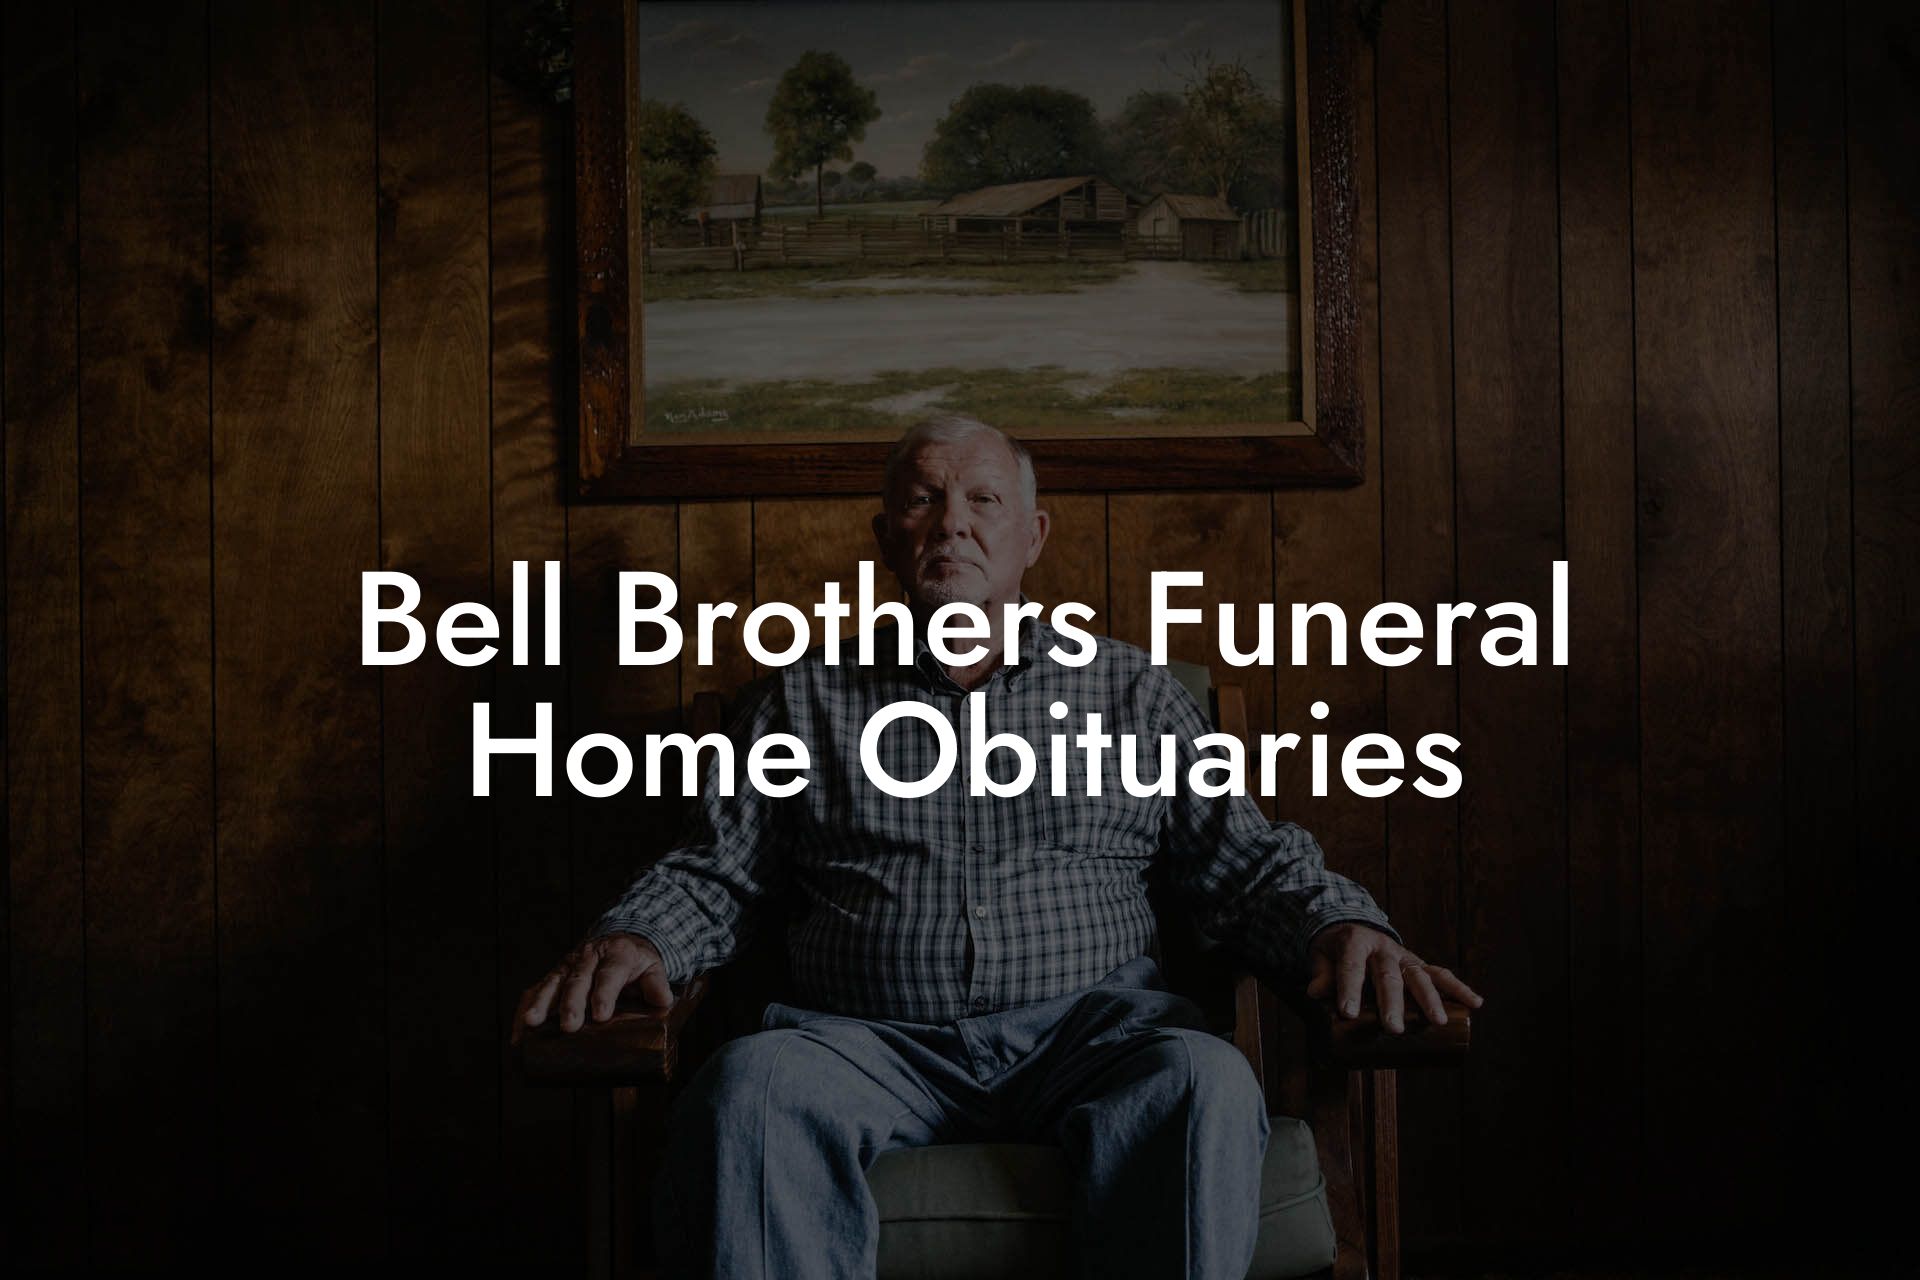 Bell Brothers Funeral Home Obituaries